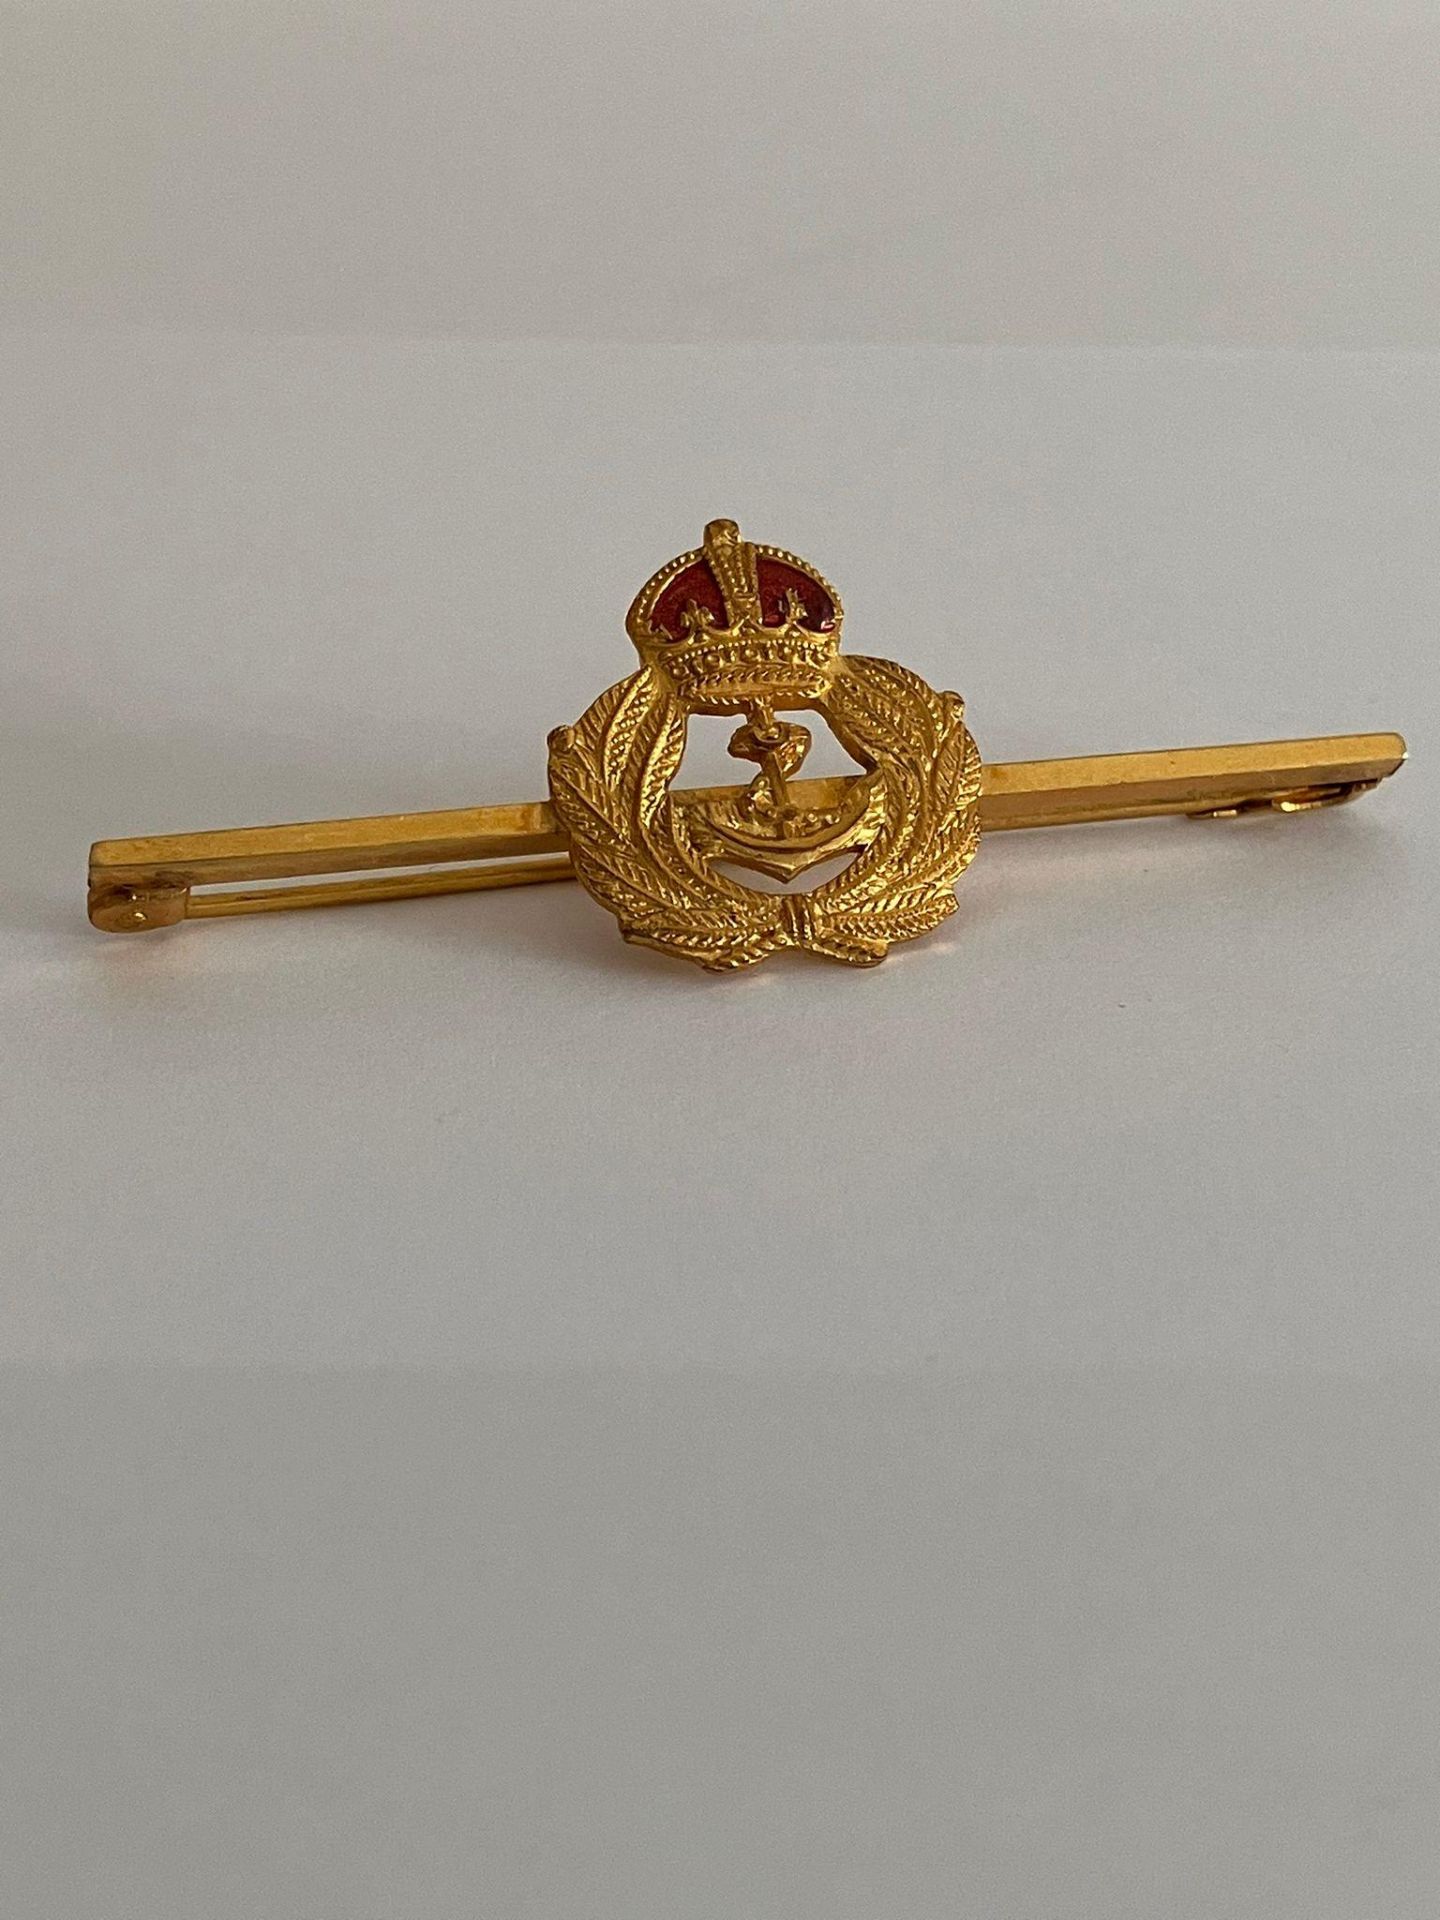 Rare World War I ROYAL NAVY SWEETHEART BROOCH. Gold Plated with red enamel detail. Excellent